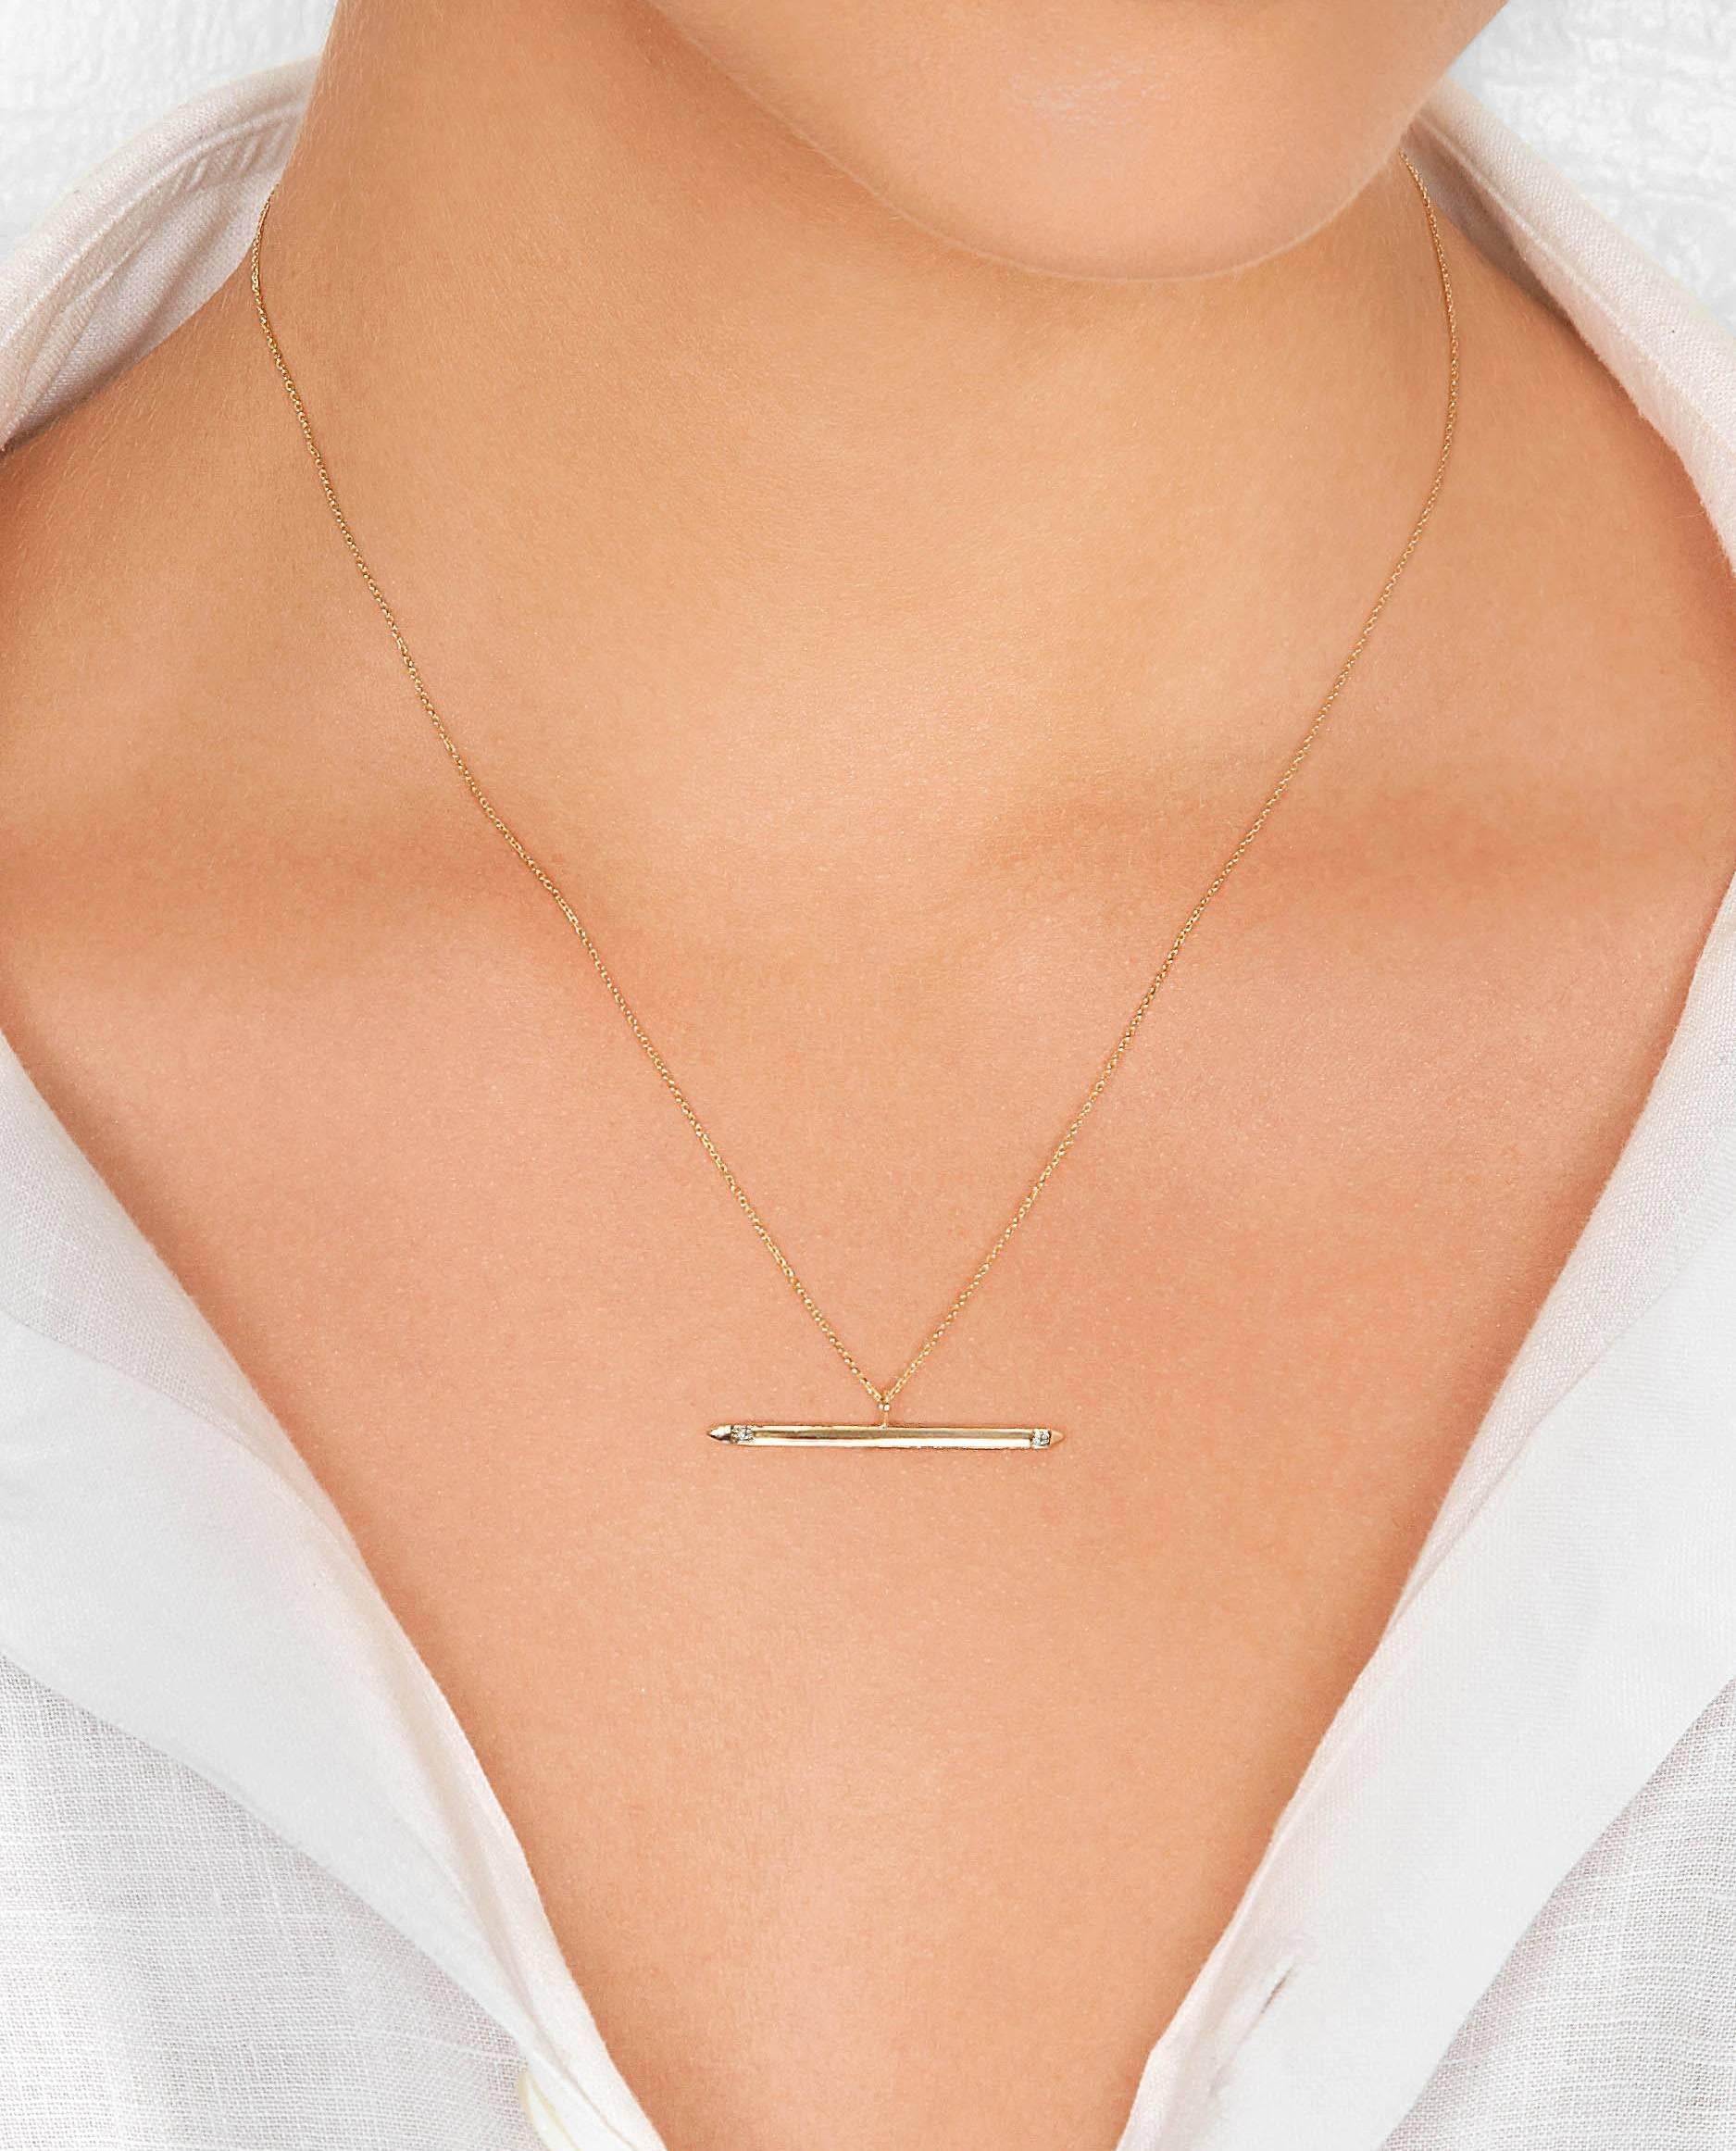 This spear-shaped pendant is crafted in 9-carat yellow gold accented with two white diamonds and strung on a fine 16-inch gold chain. The total diamond carat weight is 0.016 carats of H/VS1 quality diamonds and the pendant is 2mm in width by 35mm in